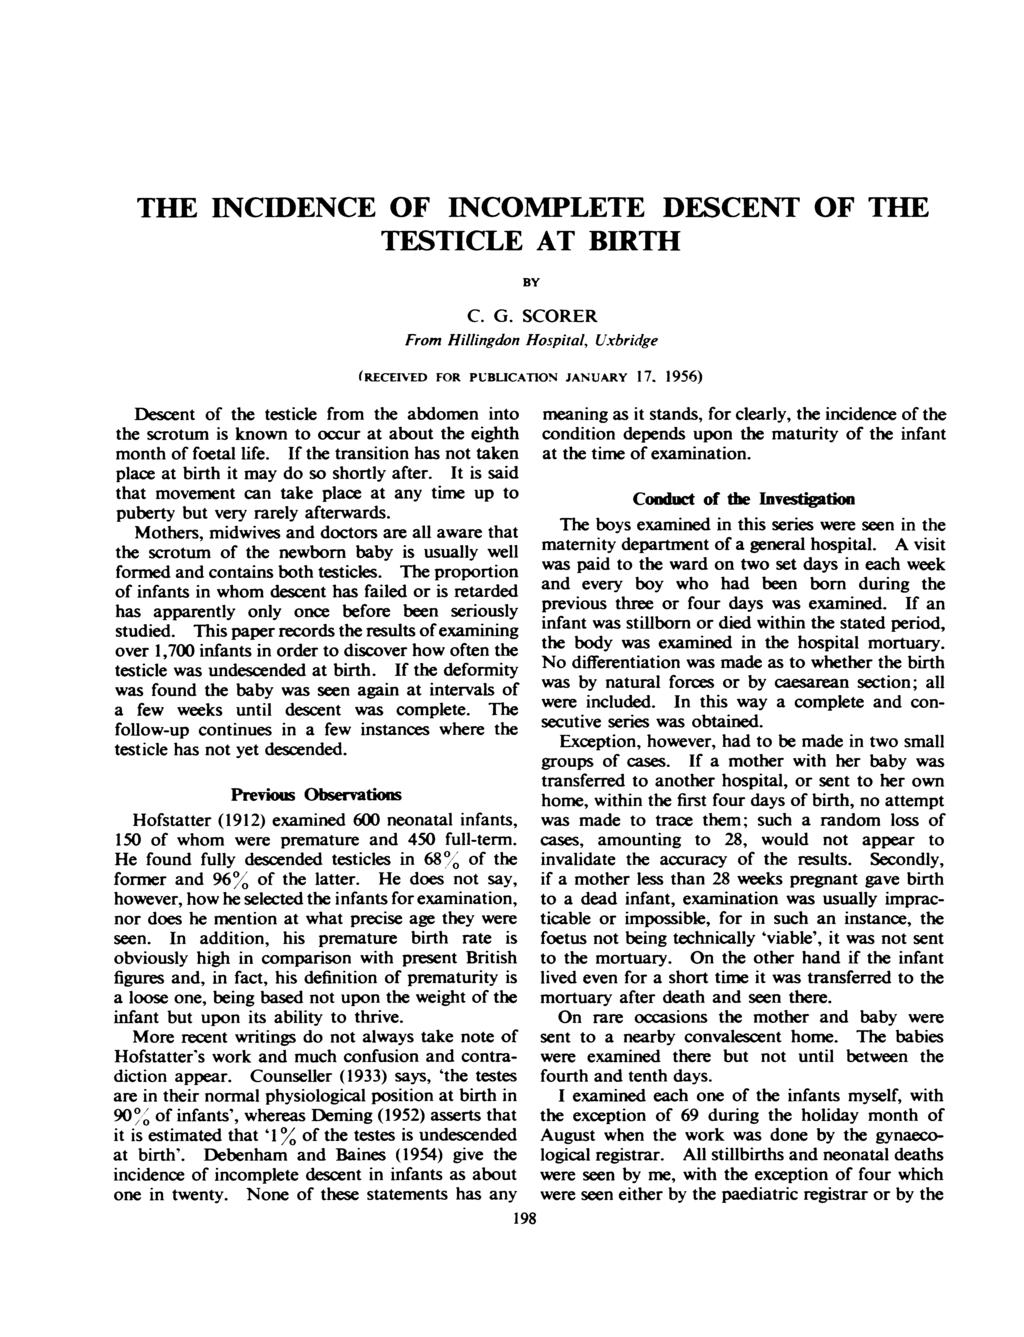 THE INCIDENCE OF INCOMPLETE DESCENT OF THE TESTICLE AT BIRTH BY C. G. SCORER From Hillingdon Hospital, Uxbridge (RECEIo-ED FOR PUBUCATION JANUARY 17.